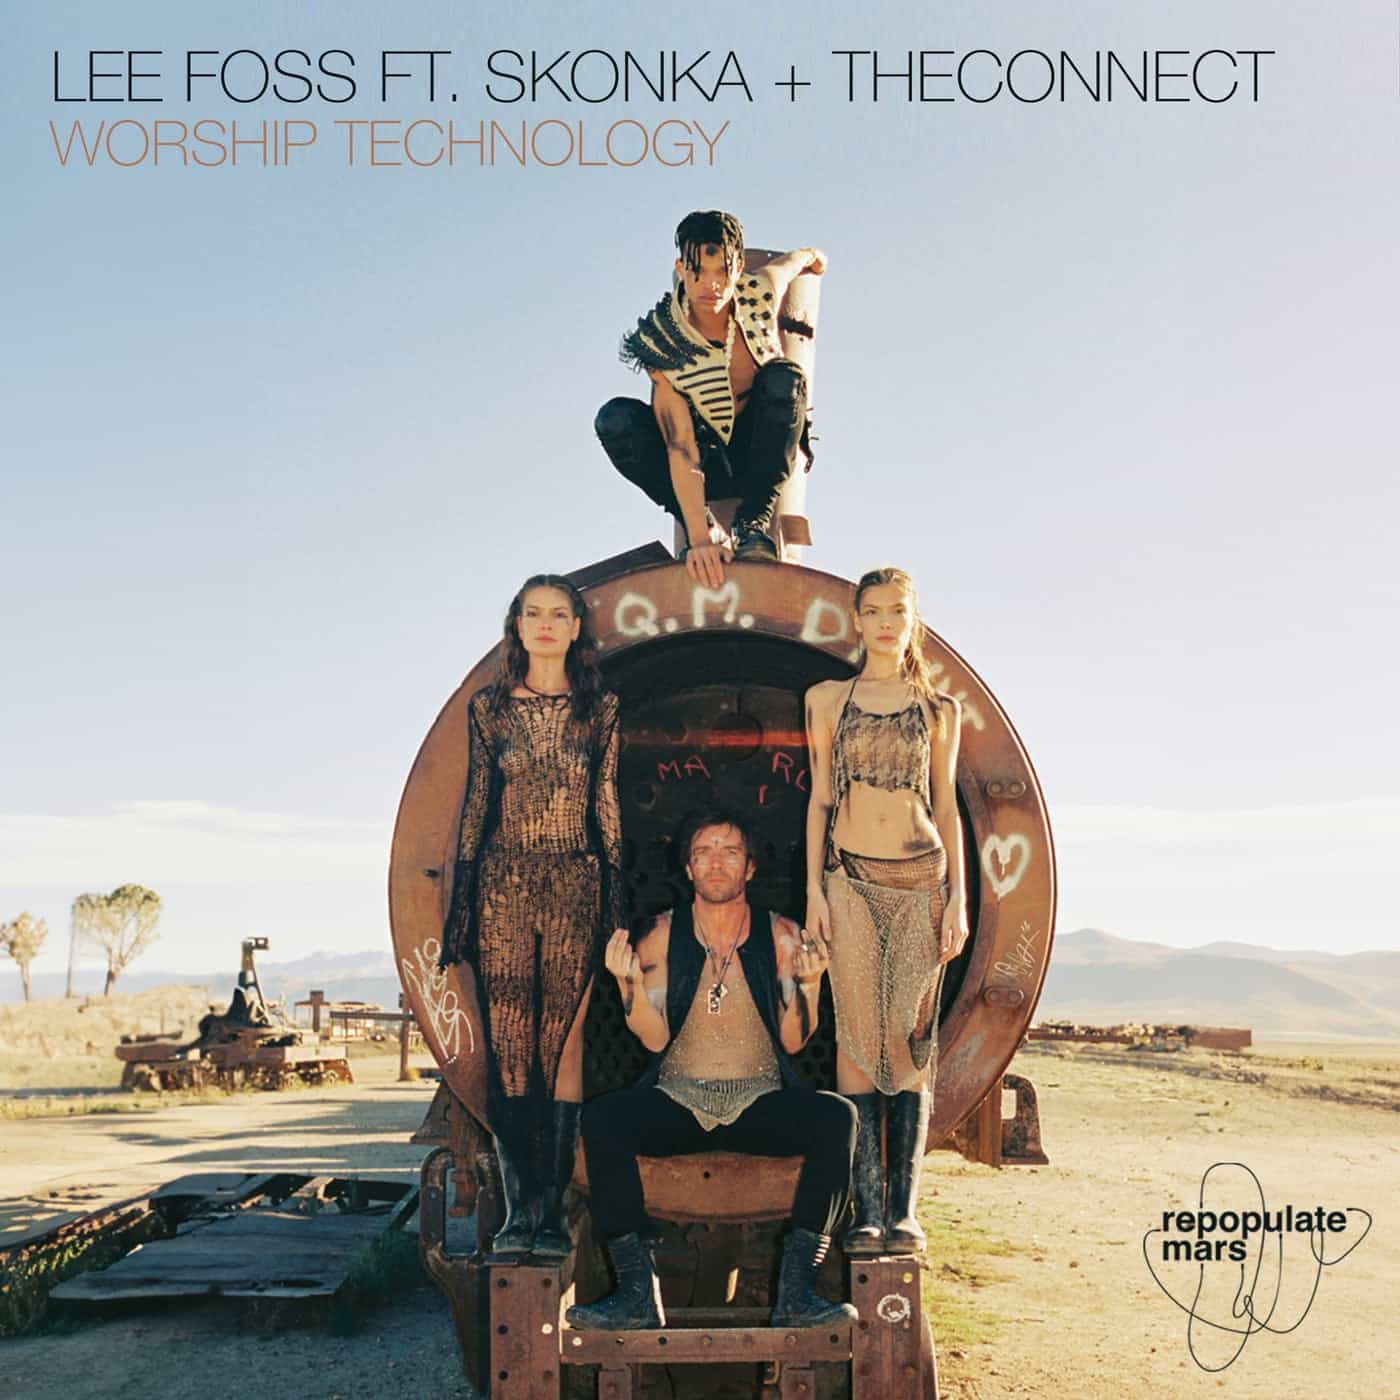 image cover: Lee Foss, Skonka, TheConnect - Worship Technology on Repopulate Mars